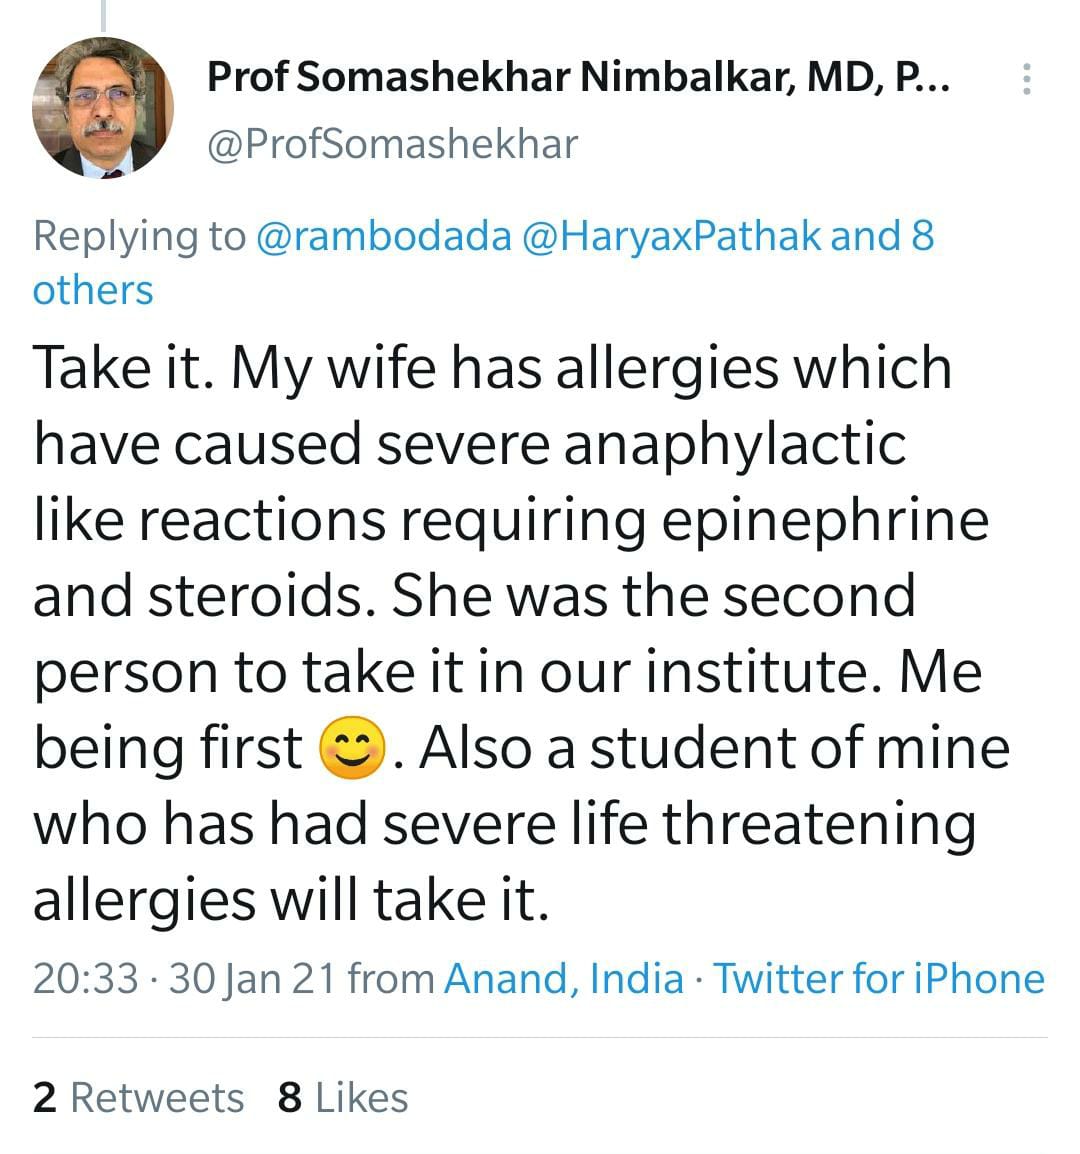 > For those having known allergies read these recommendations from senior doctors. @amitsurg  @abledoc  @anupampom  @ProfSomashekhar 7/n